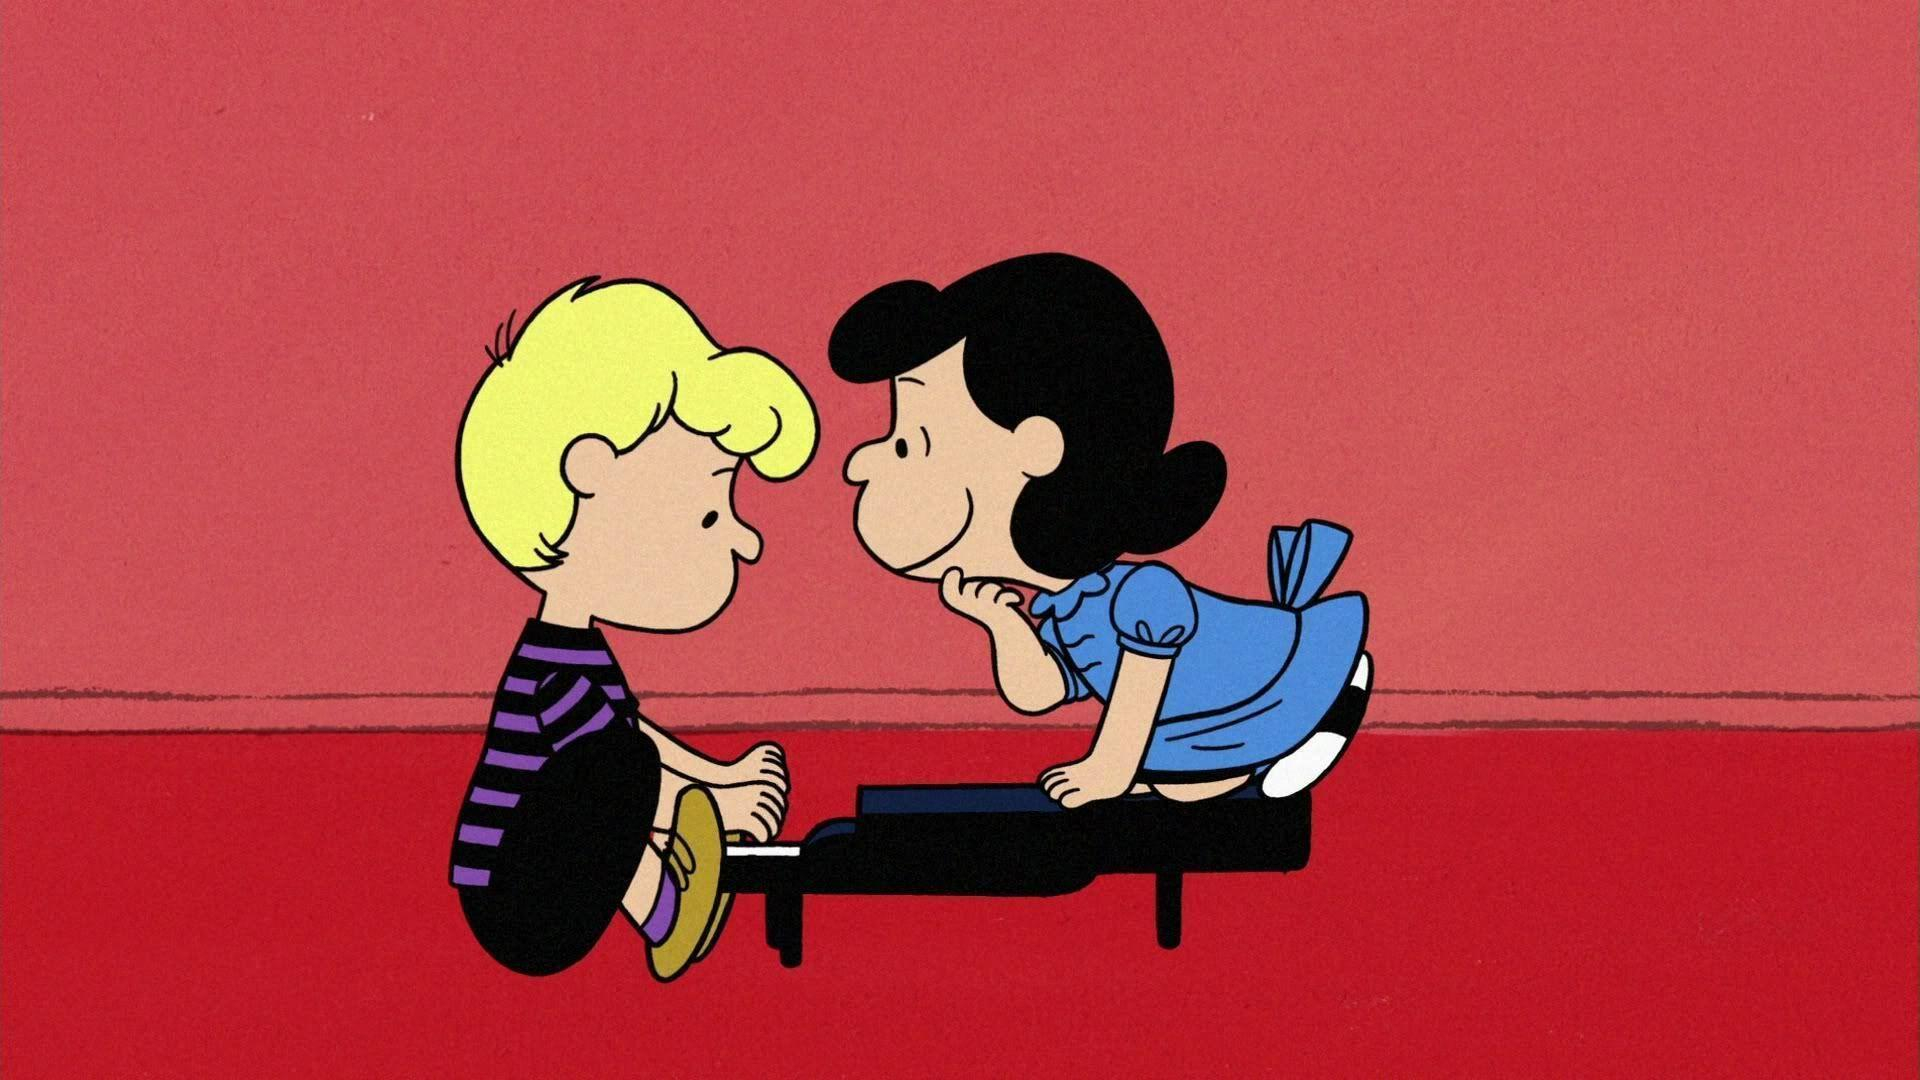 1920x1080 Peanuts Characters Wallpapers